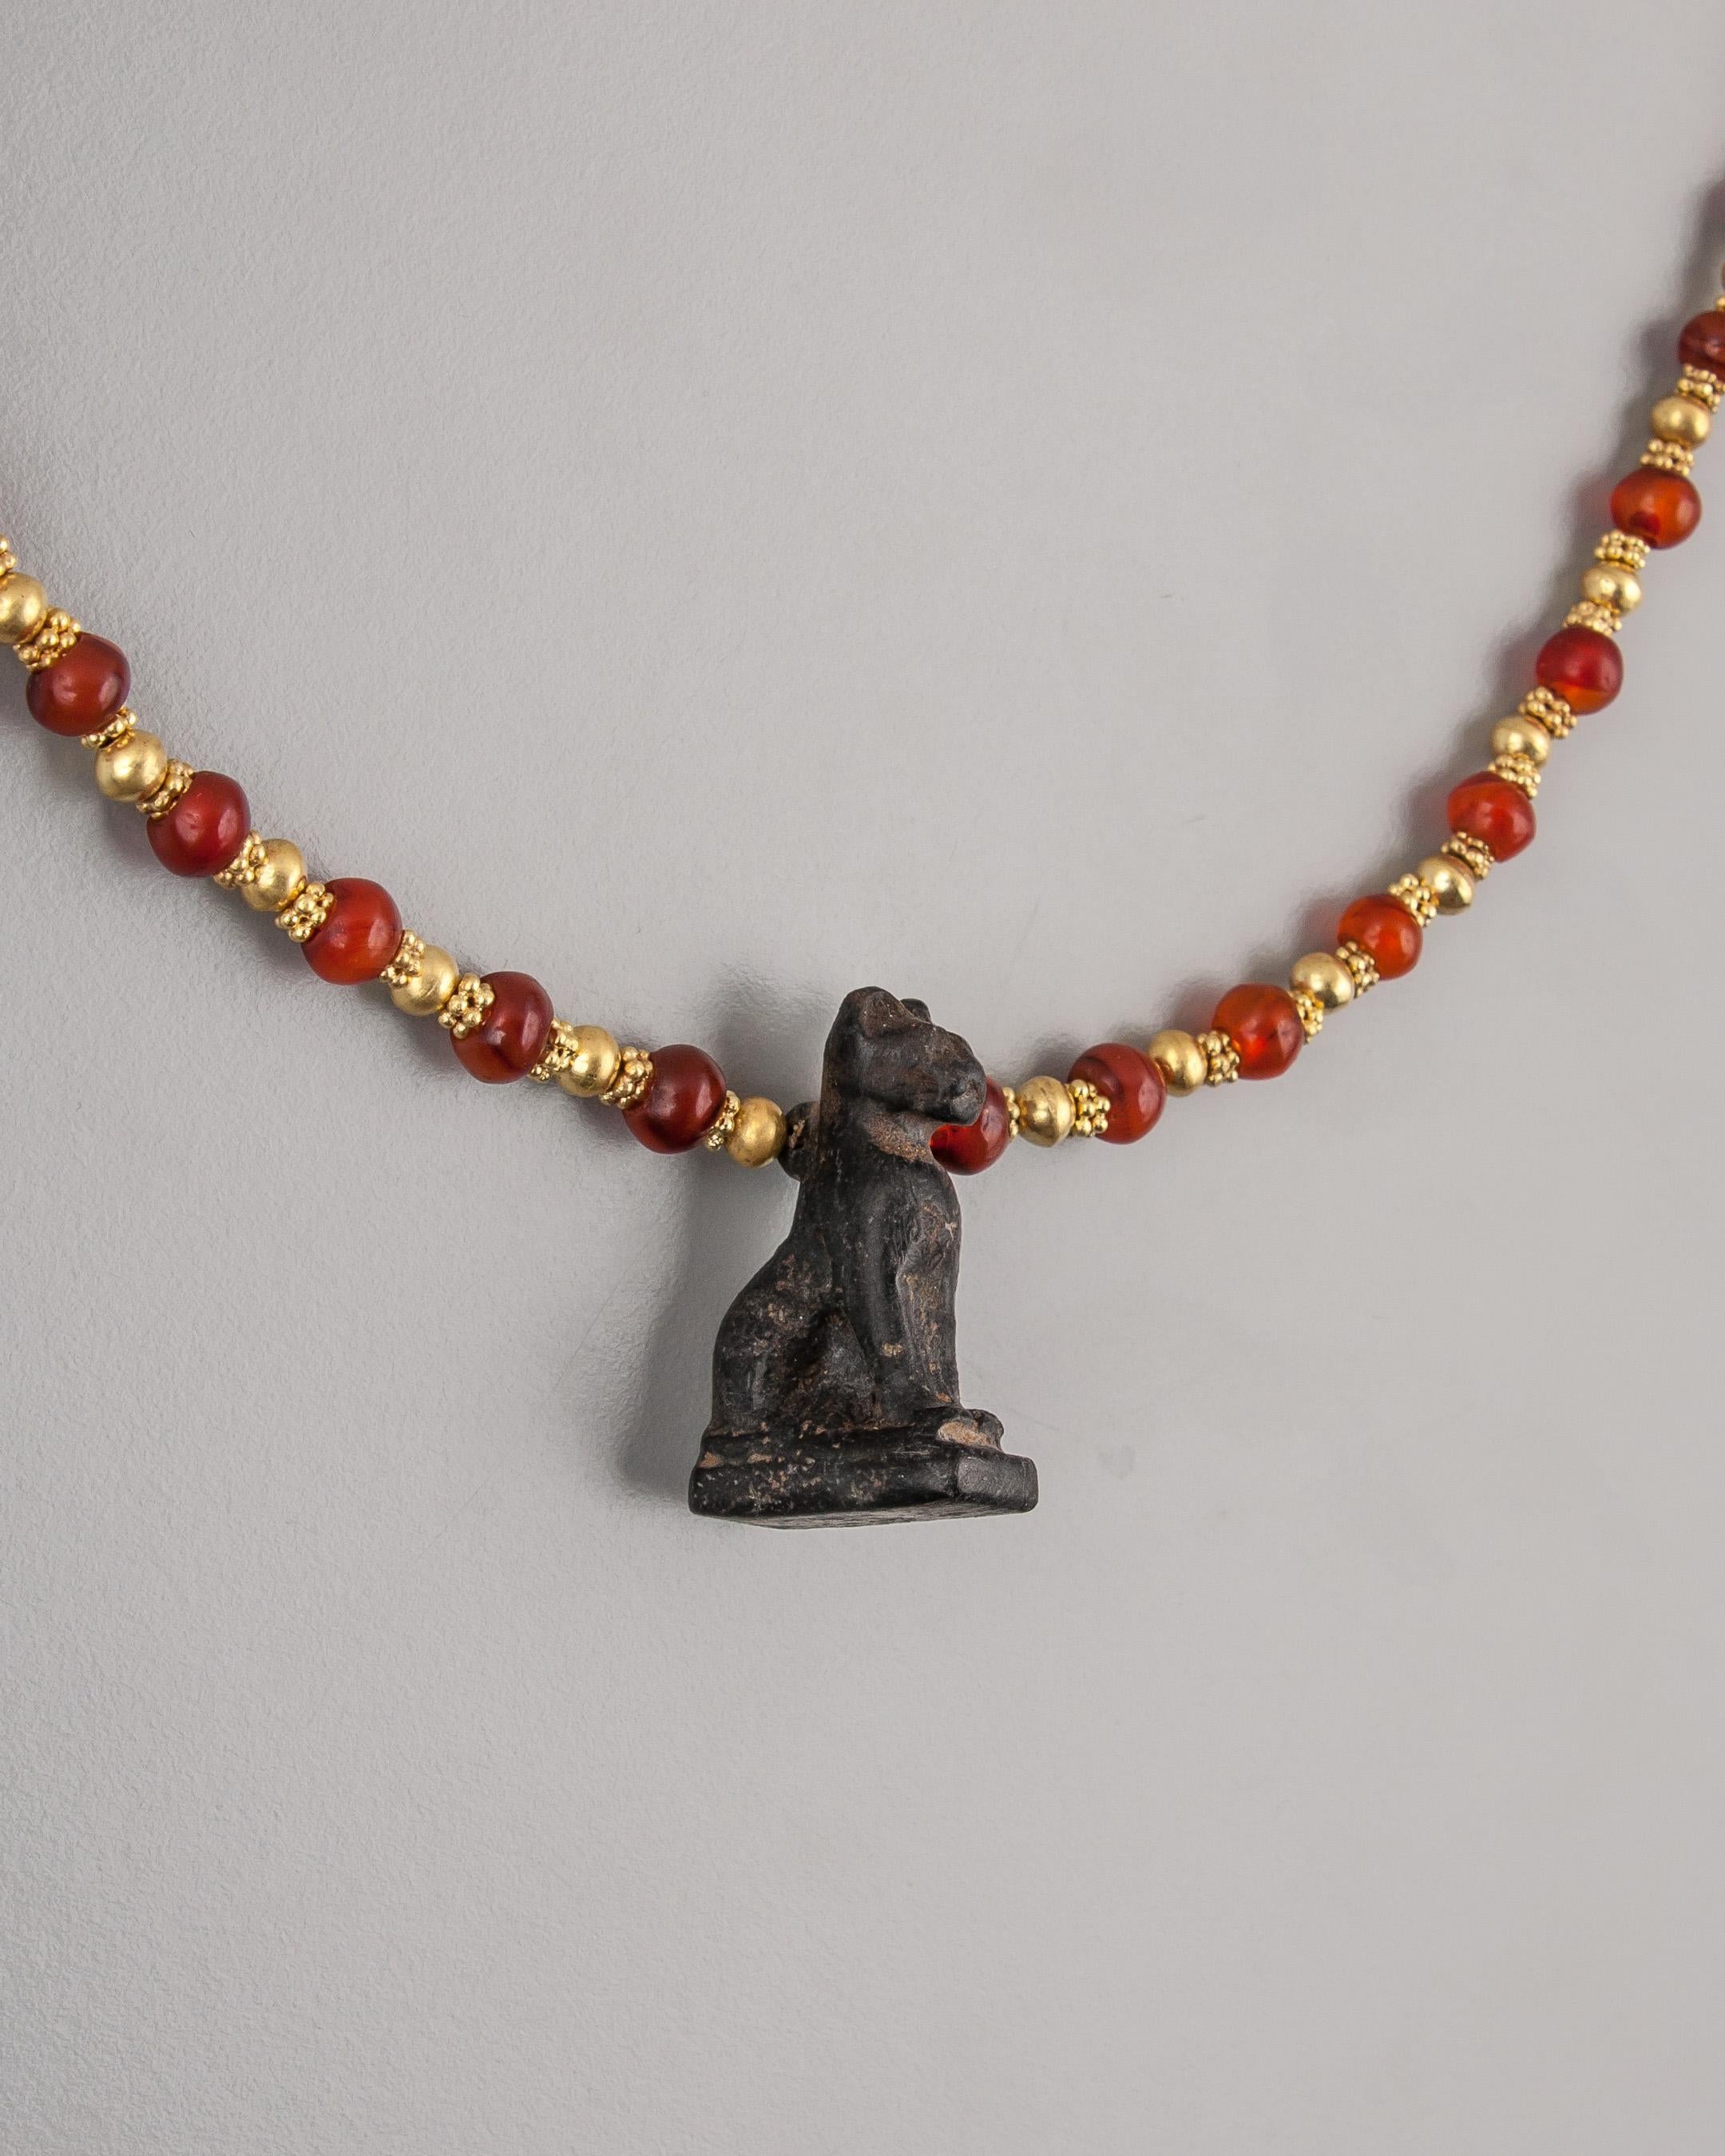 Forty-six ancient Egyptian carnelian beads with one hundred thirty-eight 20k gold beads and a black stone depiction of Bastet, the cat goddess of Bubastis. A 20k gold clasp and beading tips completes the necklace. The cat pendant is 3.5 cm tall, the